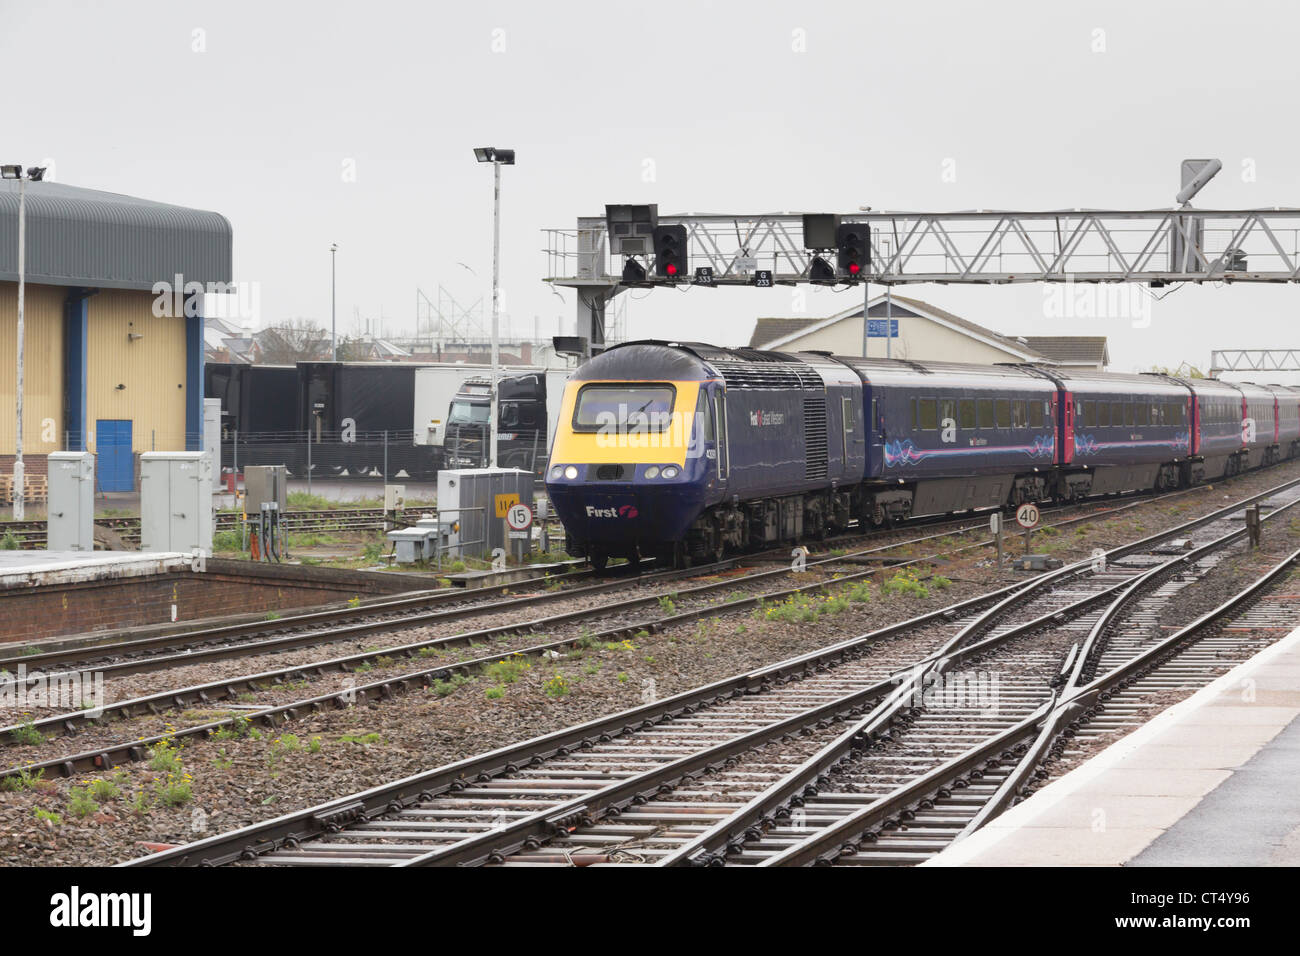 First Great Western Class 43 High Speed Train (HST) set entering Swindon Station enroute to London. Stock Photo